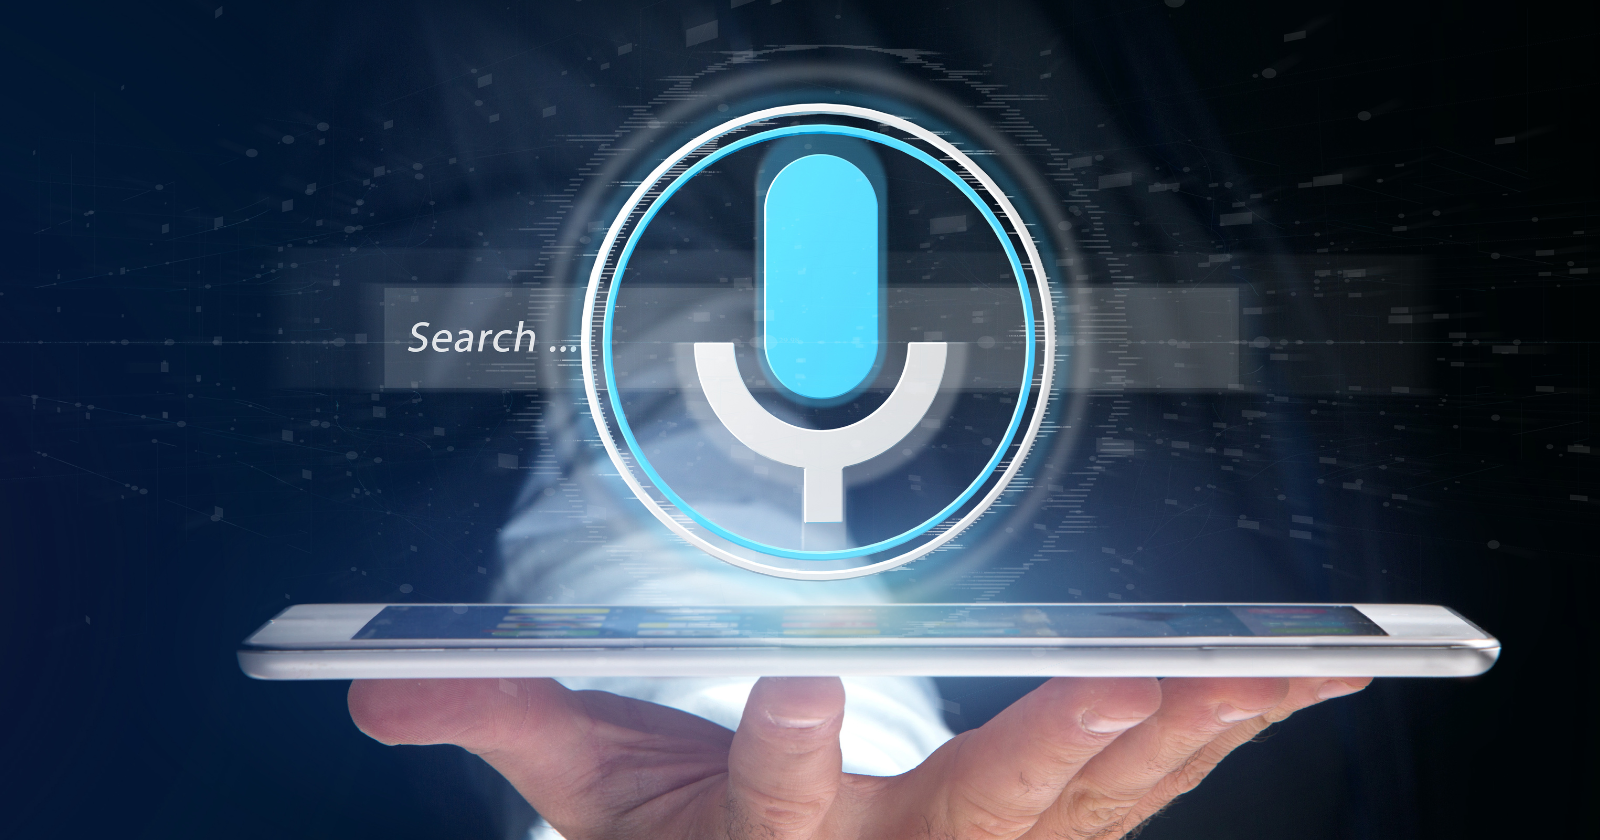 How Can Voice Search Benefit Your SEO?